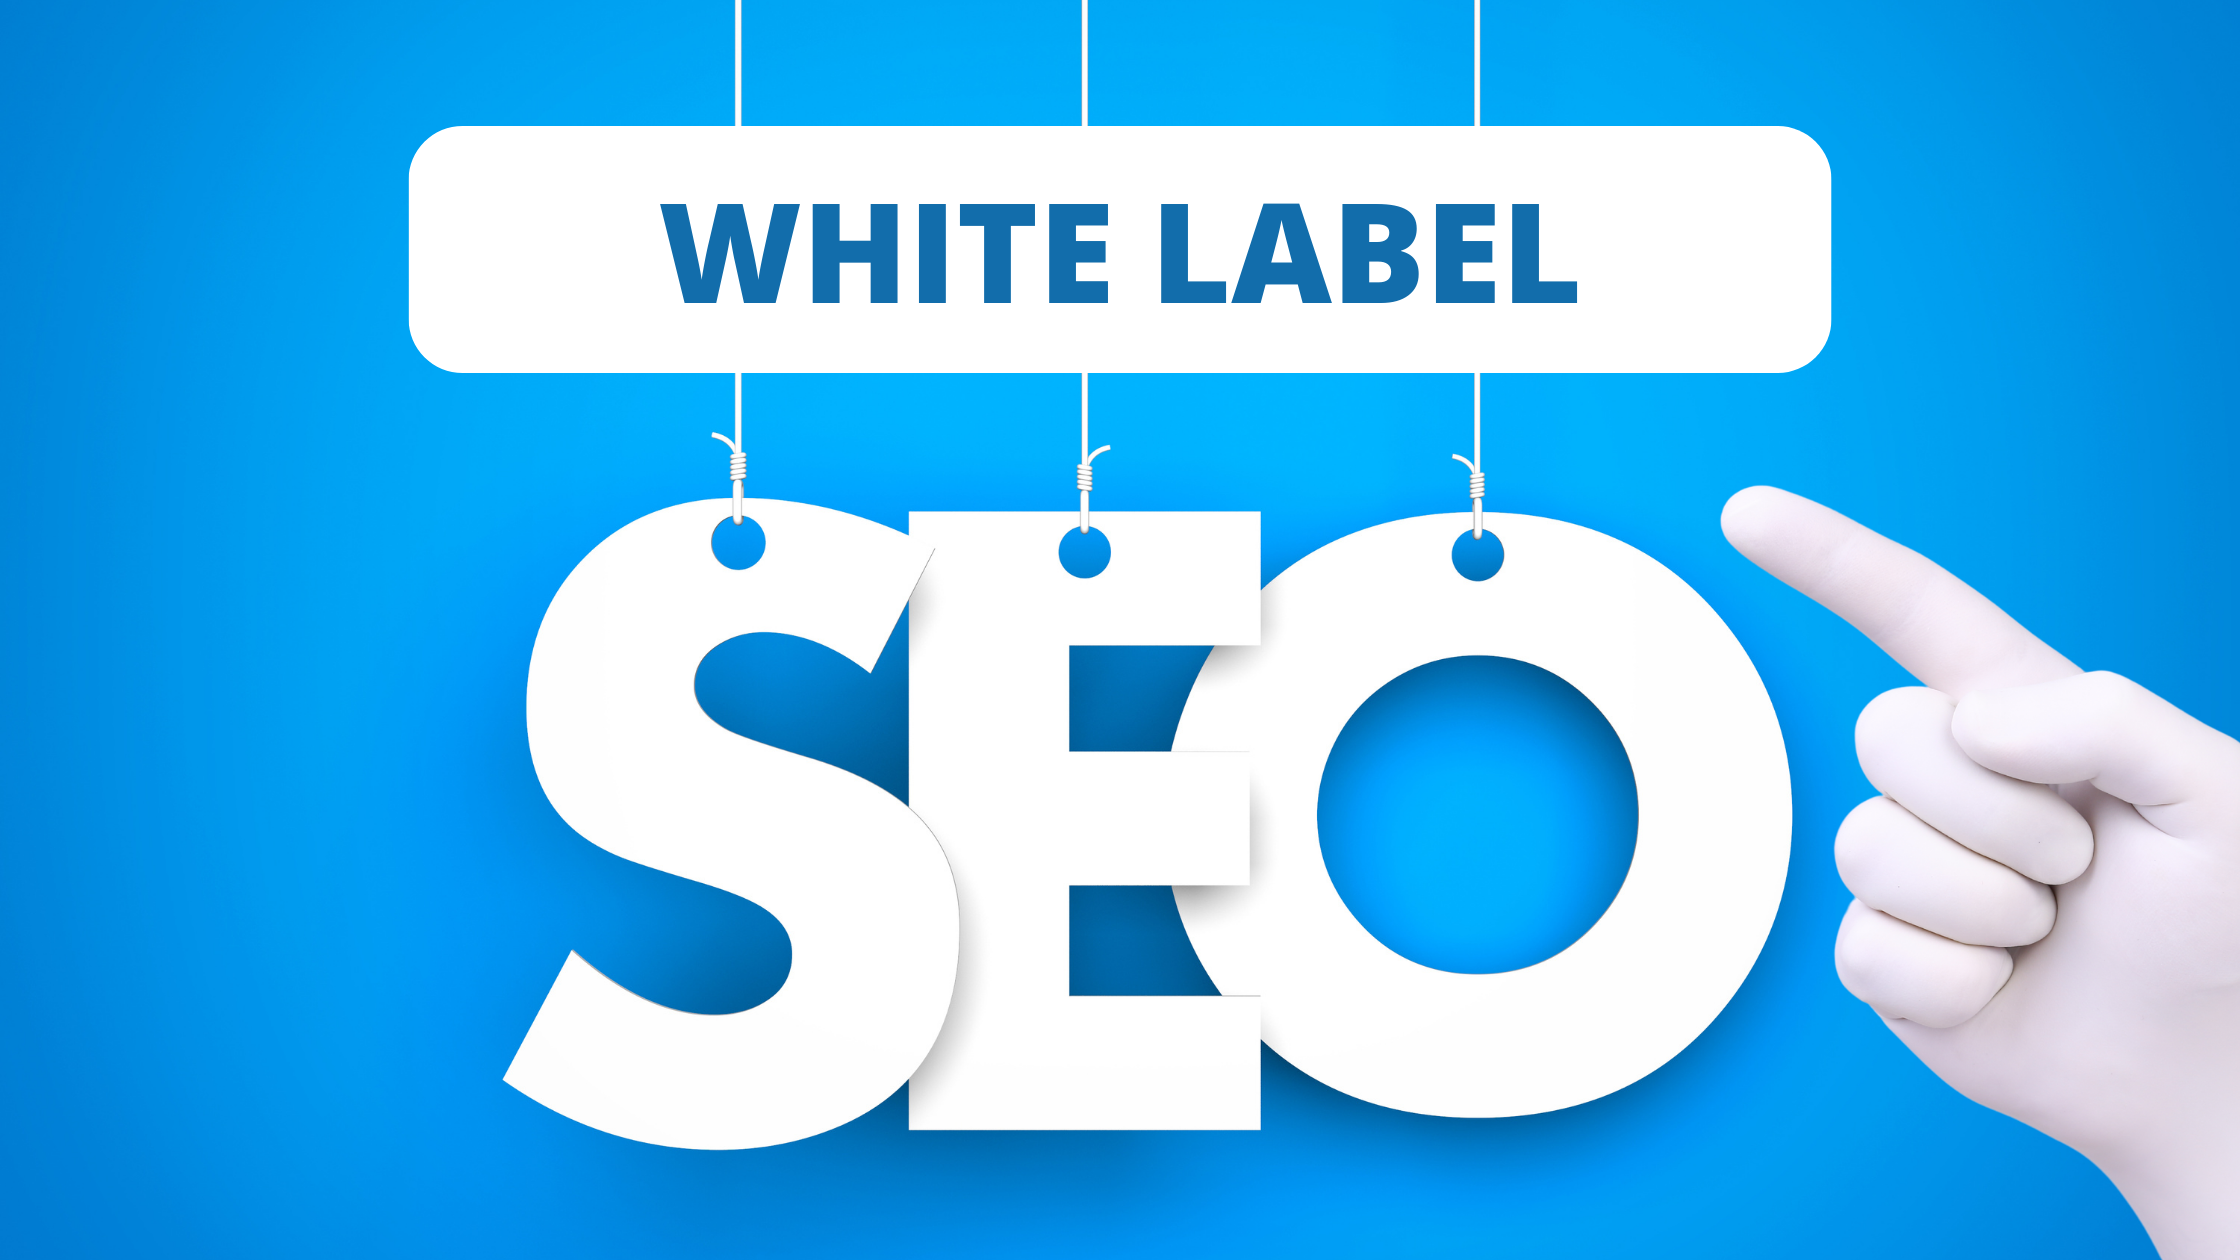 White label SEO is a service where you serve as the middle man, connecting your clients to SEO services - but not having to do the actual tedious SEO work.